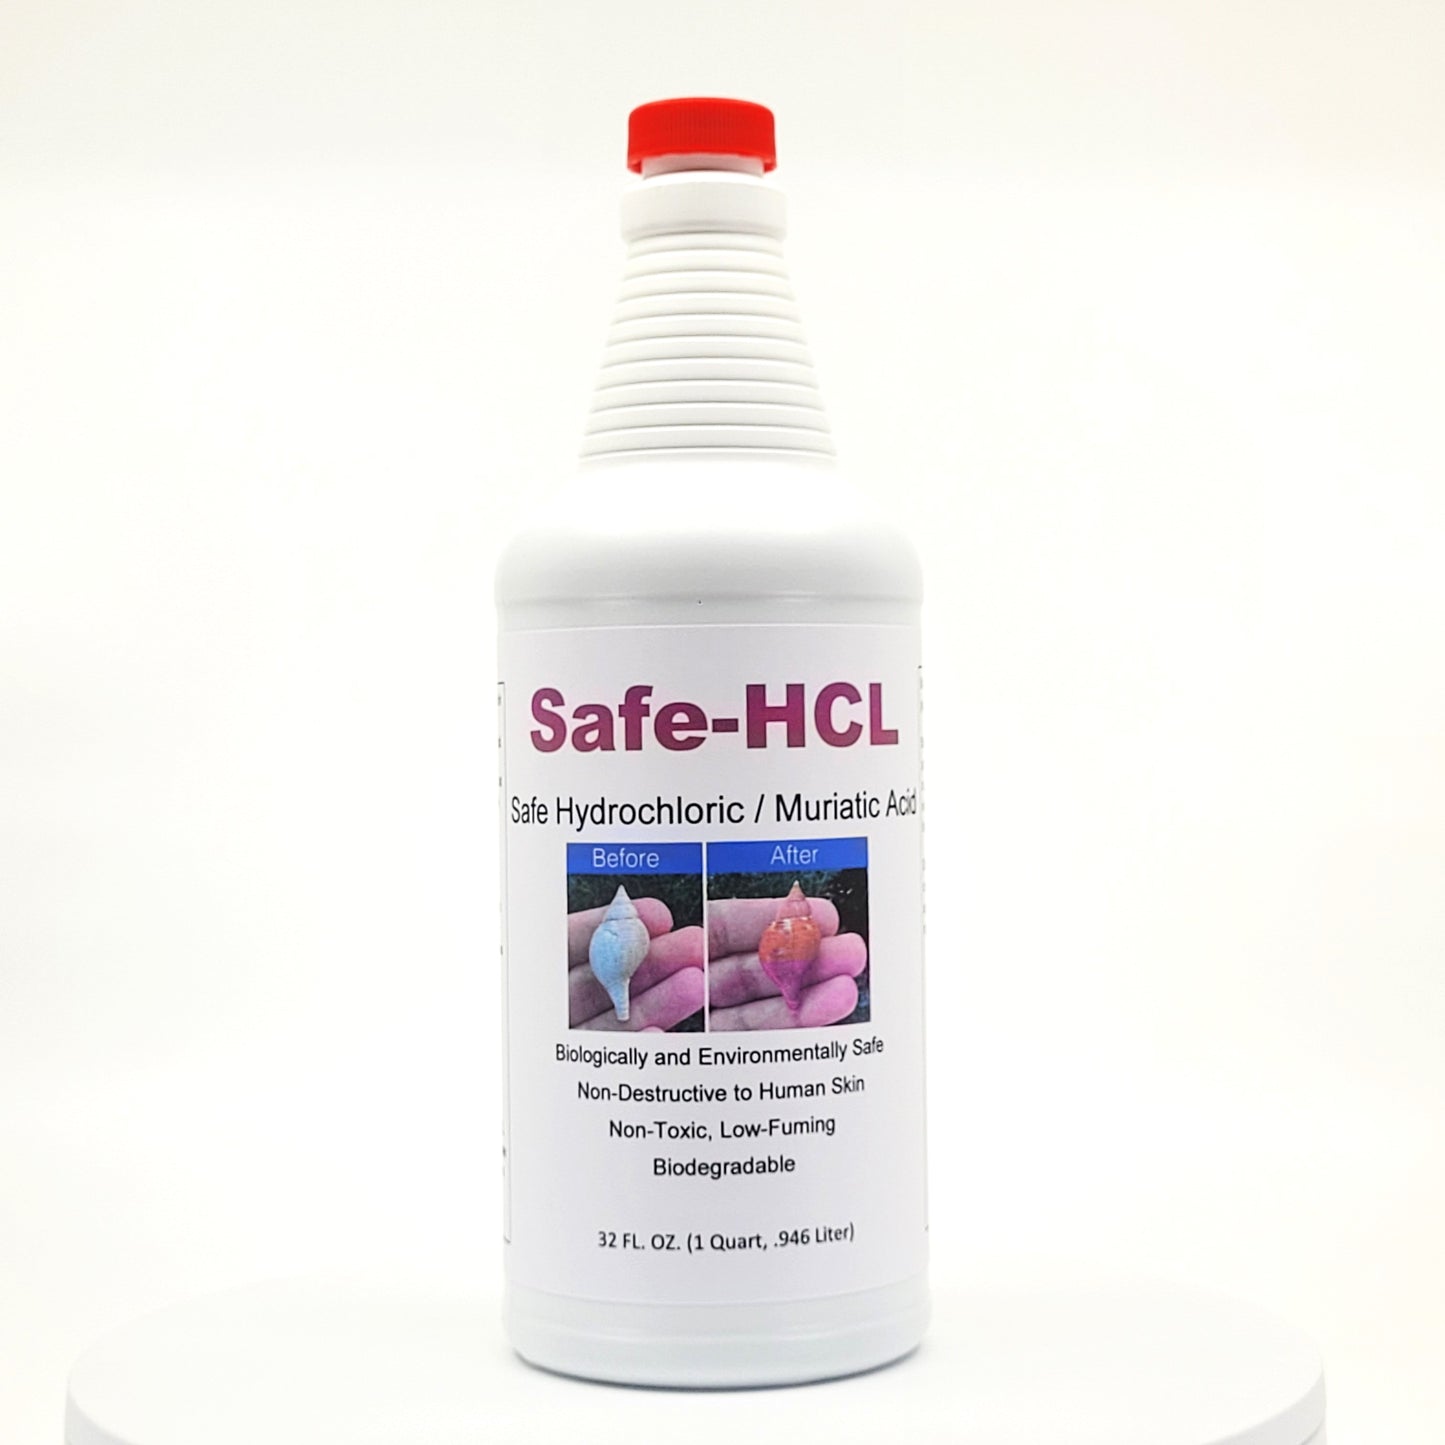 Safe-HCL- (1 quart, 0.94 Liter) Biologically Safe, Synthetic, Hydrochloric / Muriatic Acid - NO Personal Protective Equipment (PPE) Required